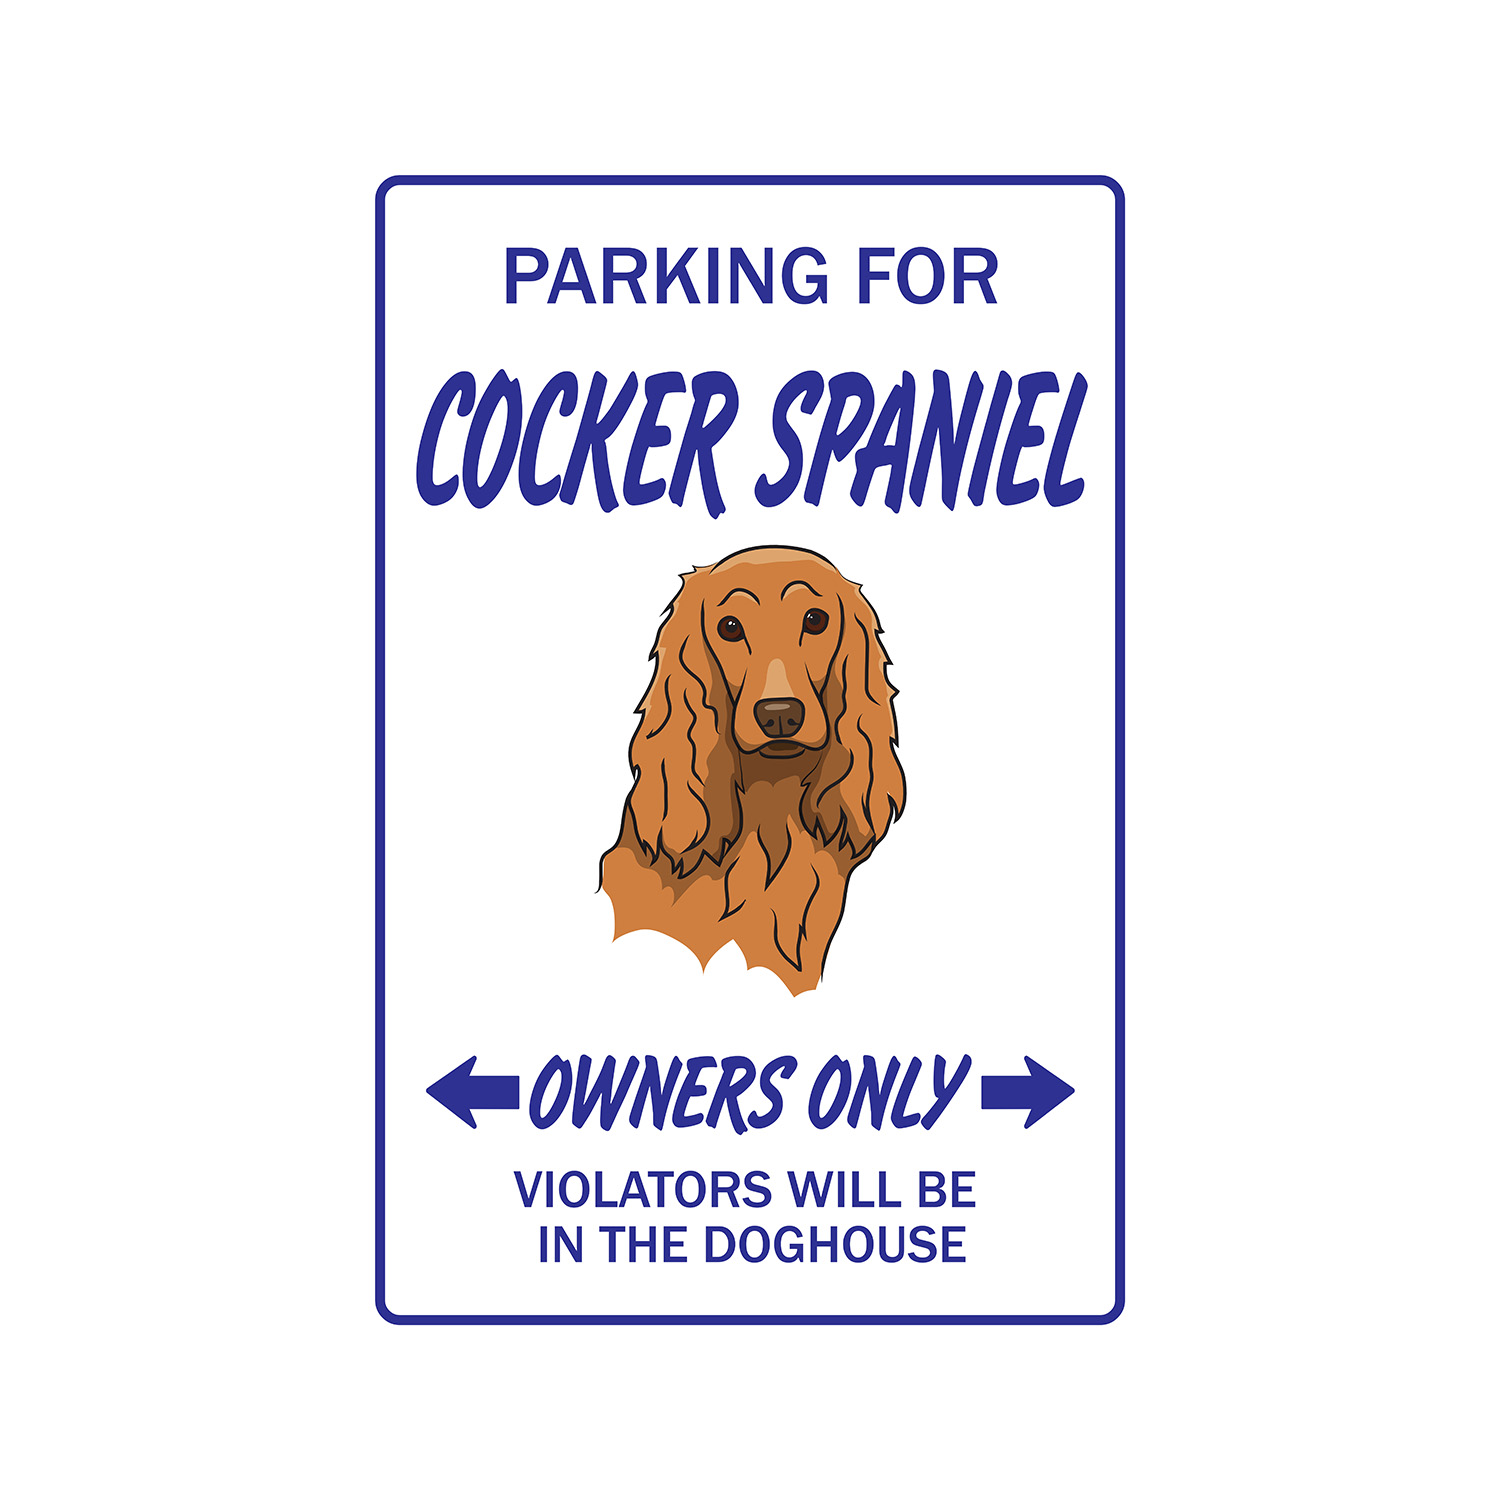 Cocker Spaniel Novelty Aluminum Sign | Indoor/Outdoor | Funny Home Décor for Garages, Living Rooms, Bedroom, Offices | SignMission Gun Lover Breeder Groomer Sign Wall Plaque Decoration - image 1 of 4